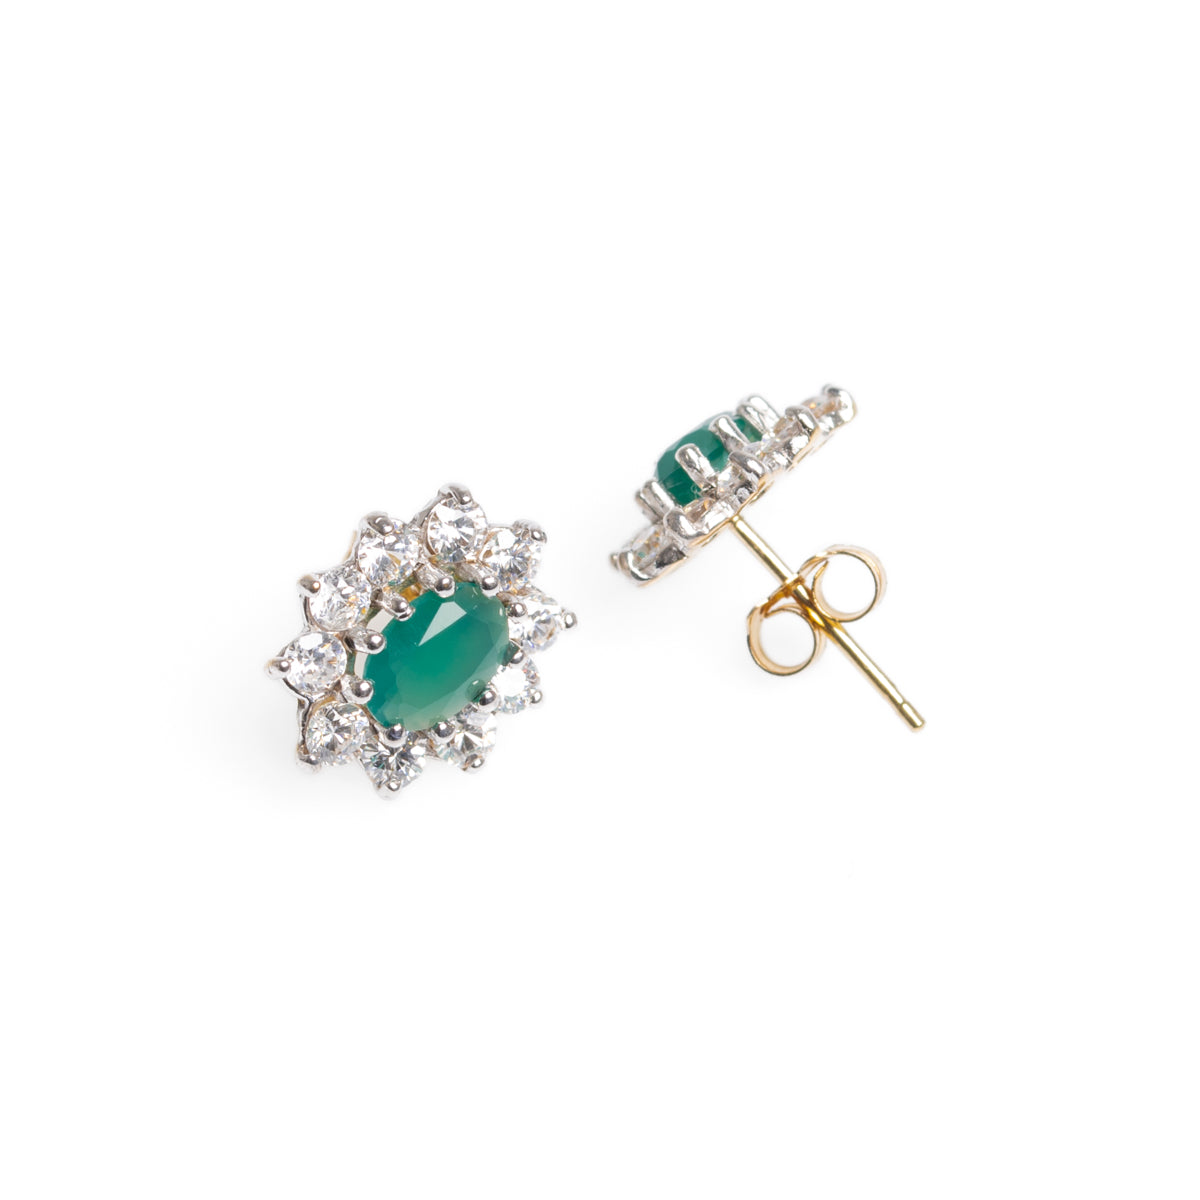 Pair 9ct Gold Chrysoprase & Cubic Zirconia Halo Stud Earrings Butterfly Backs (Code A979)